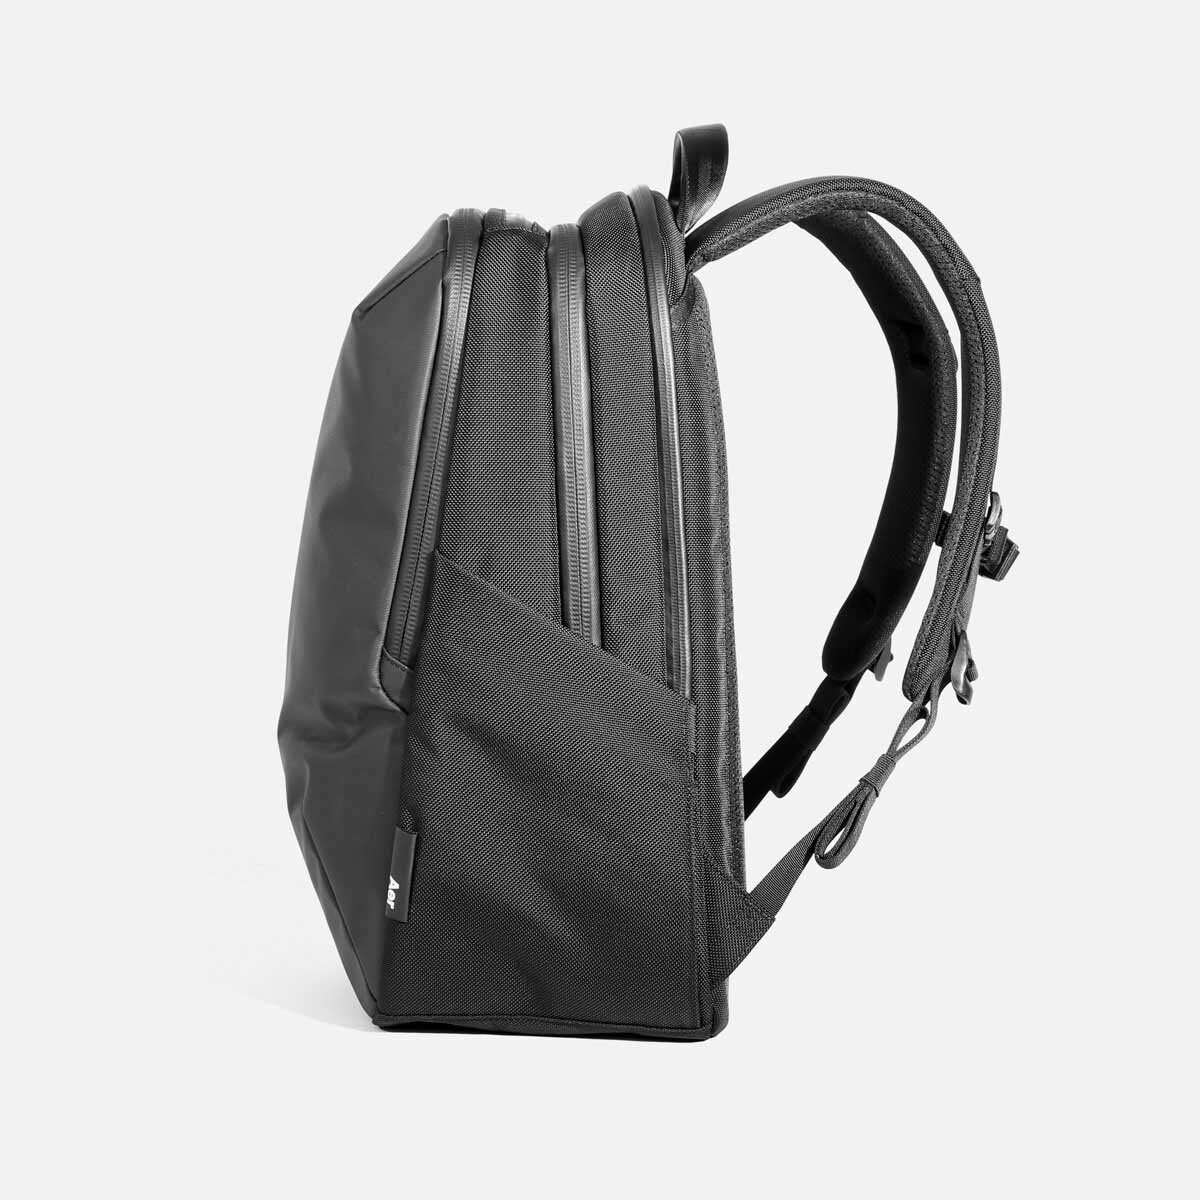 Aer Tech Pack 2 the best laptop backpacks – Mined